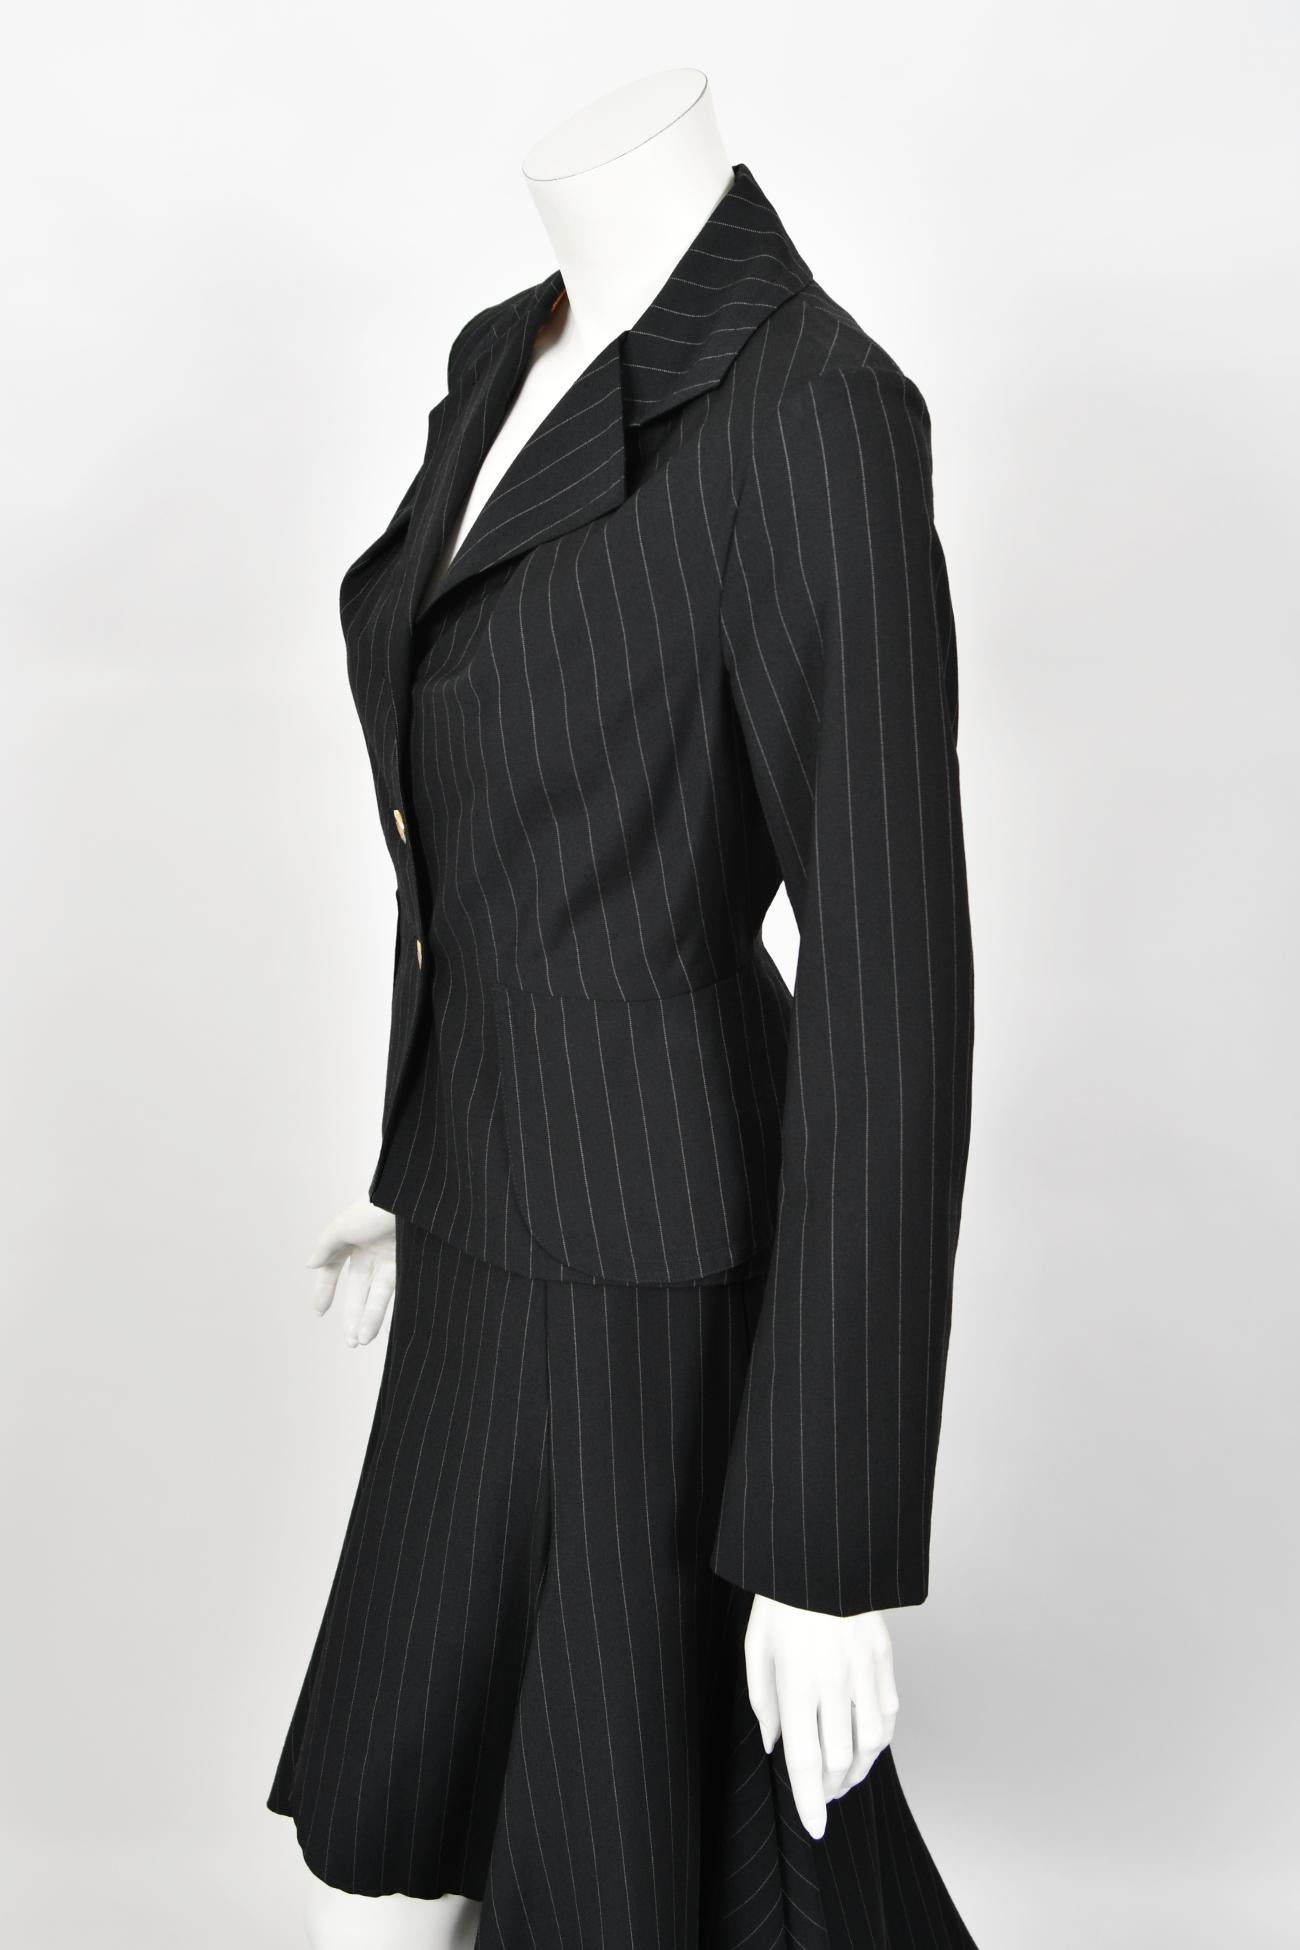 Archival 1994 Vivienne Westwood Pinstripe Wool Jacket and High-Low Trained Skirt For Sale 6